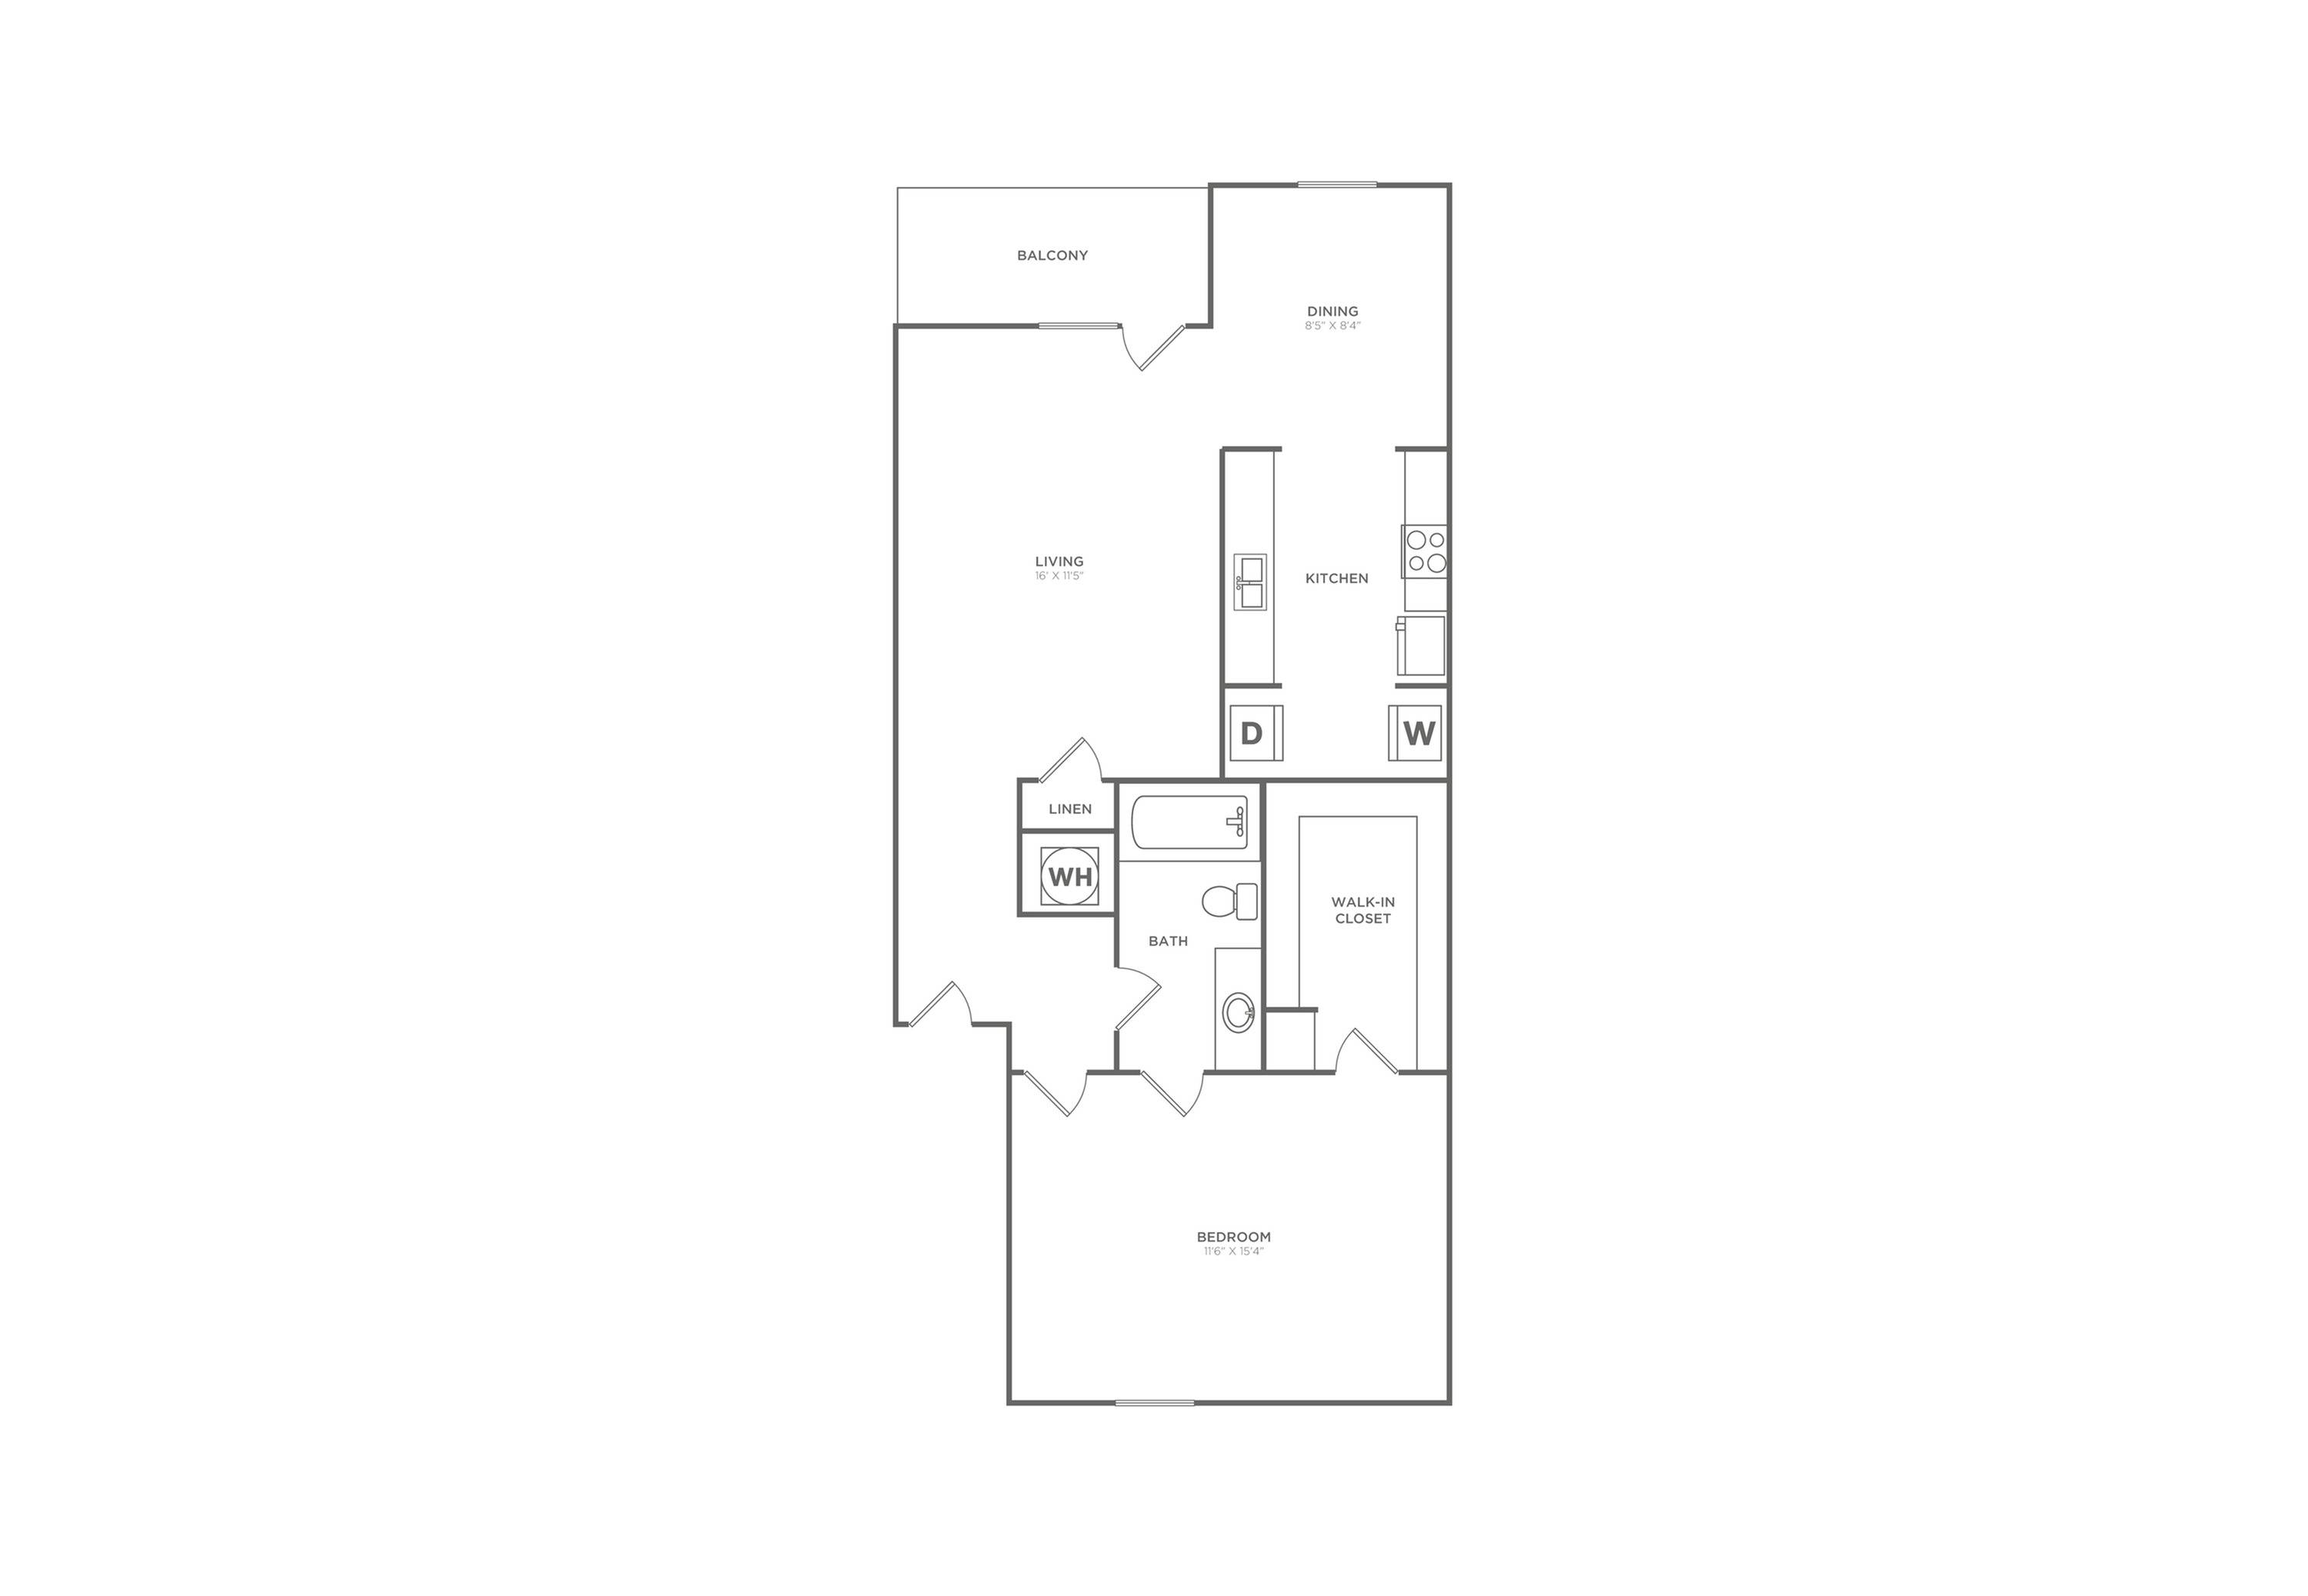 Post Oak | 1 bed 1 bath | 754 sq ft | Floor Plan map for a one bedroom unit at our apartments for rent in  Nashville, TN, featuring labeled rooms with dimensions.